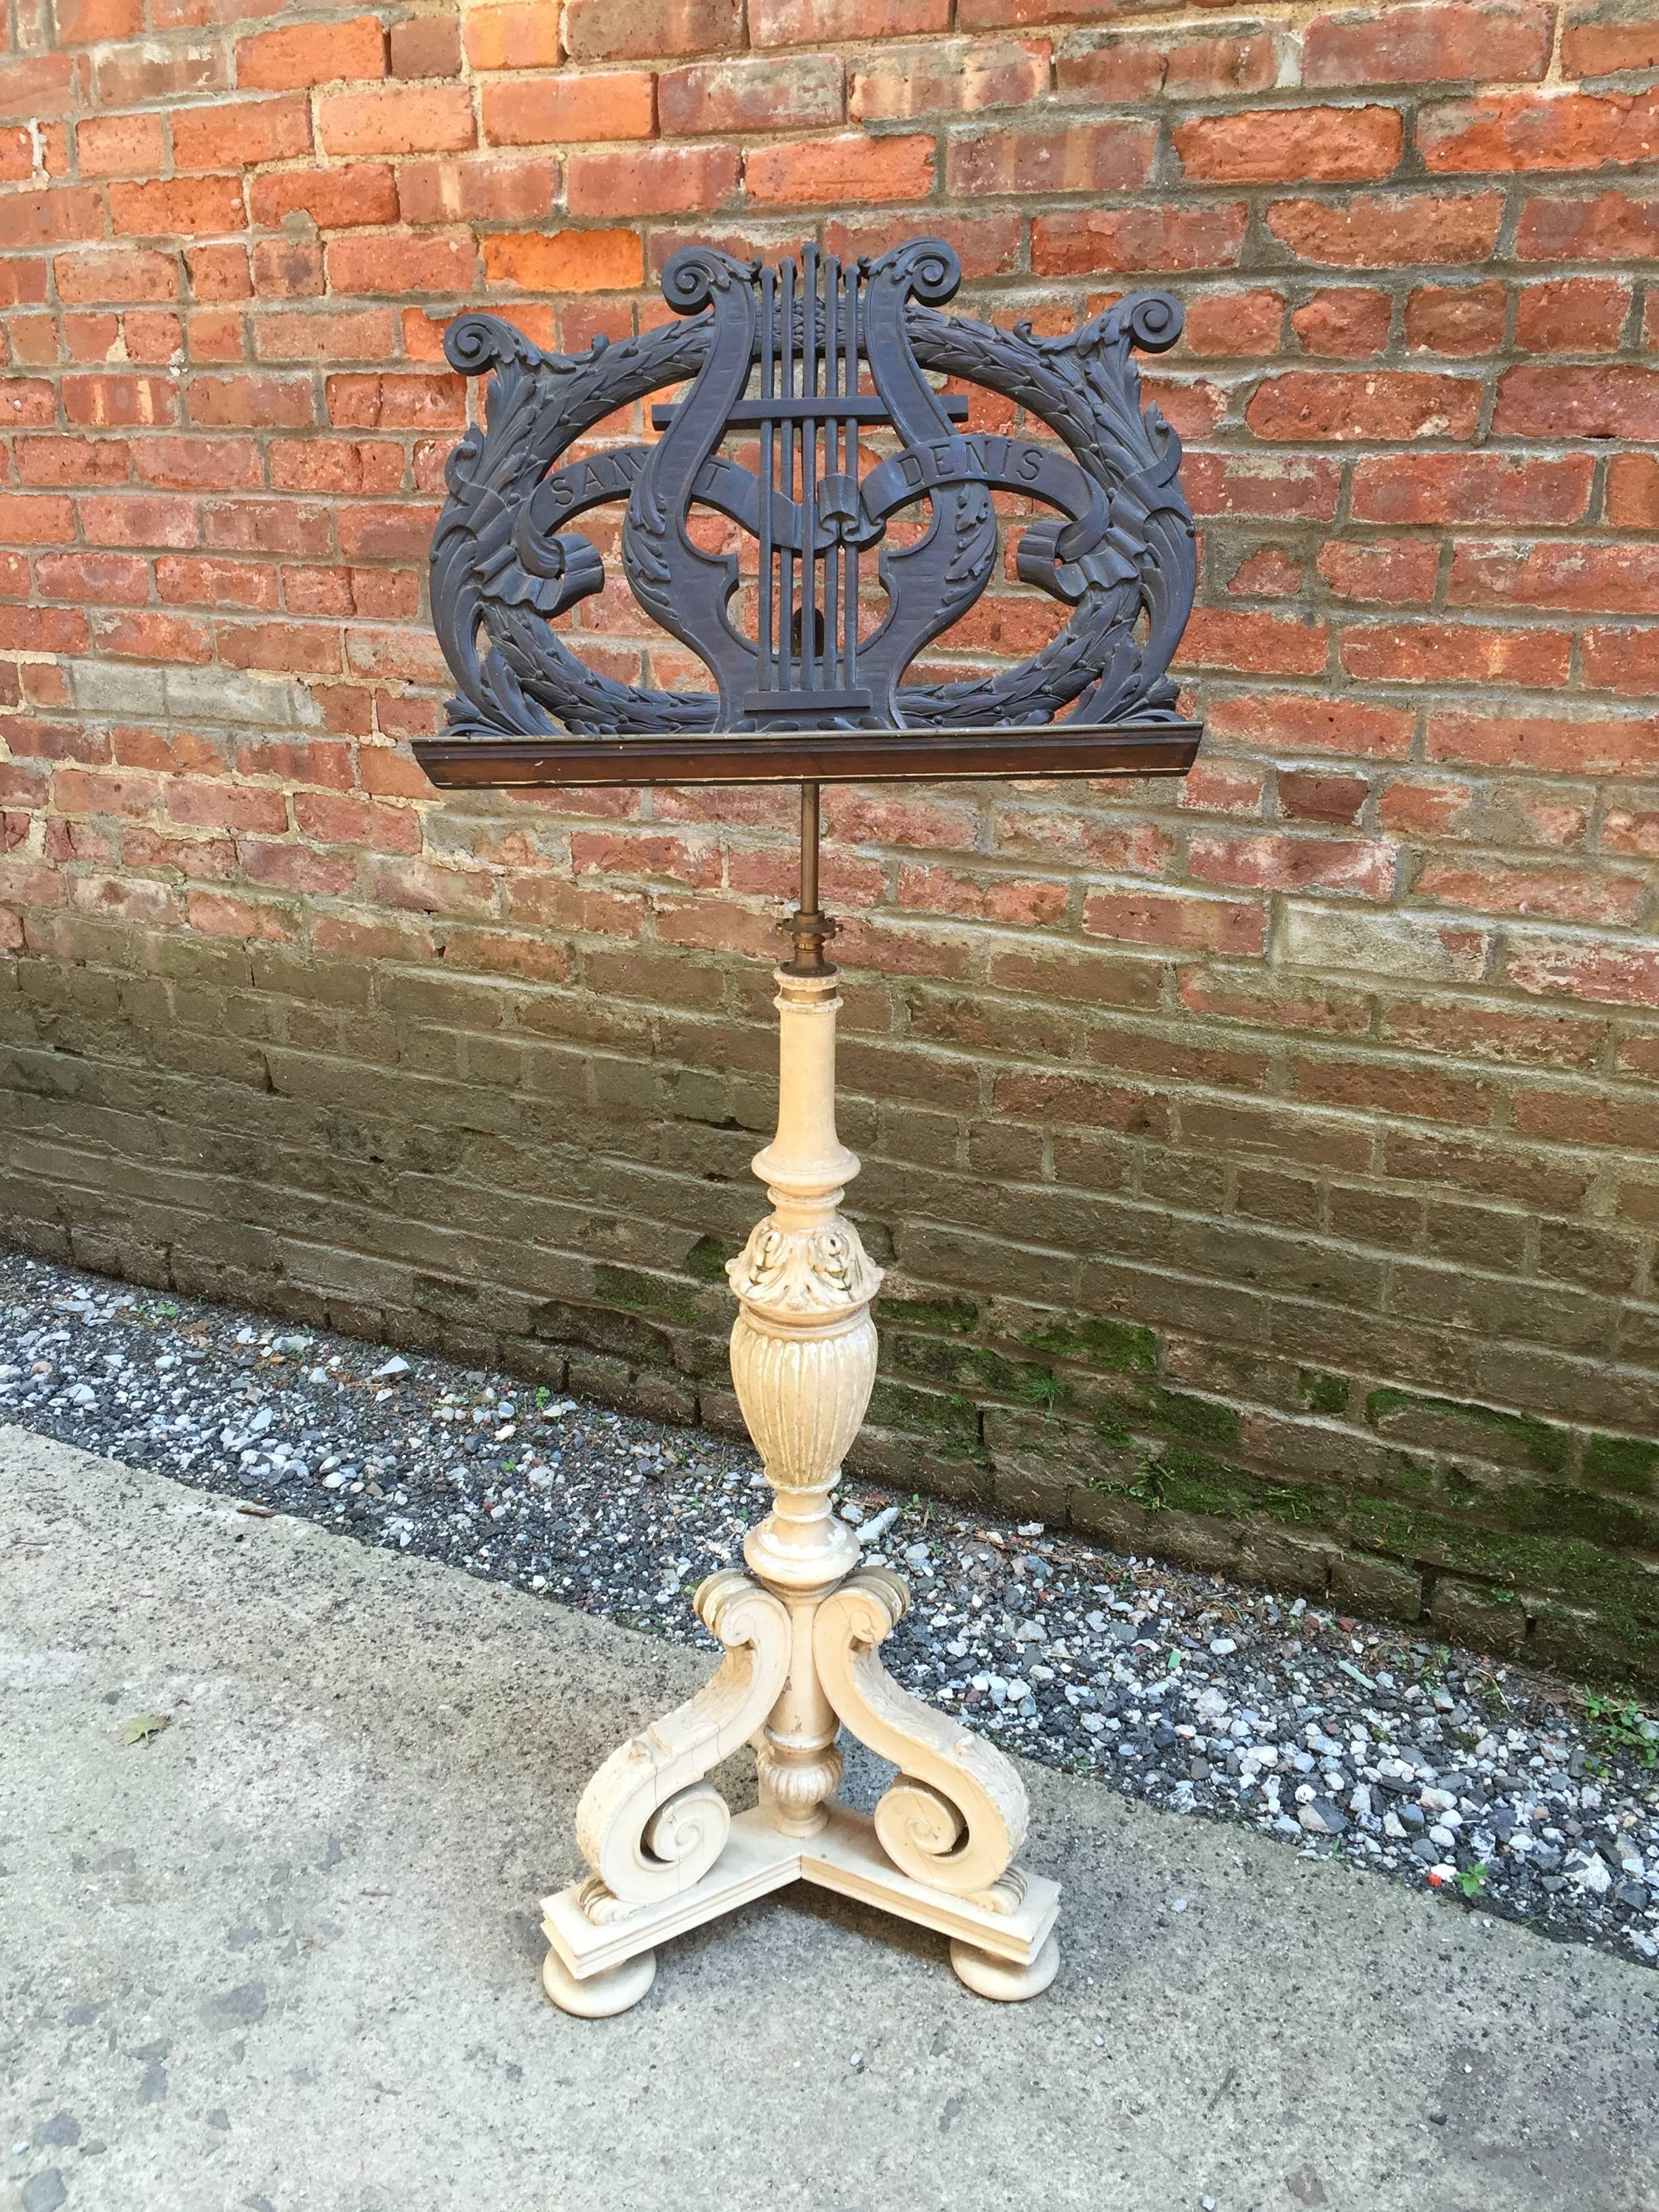 Intricately carved solid walnut music stand. Adorned with carved lyre and leaf and berry motif. Solid brass hardware for adjusting angle and height. The base retains an old white paint that is perfectly distressed and worn due to age. It is adorned